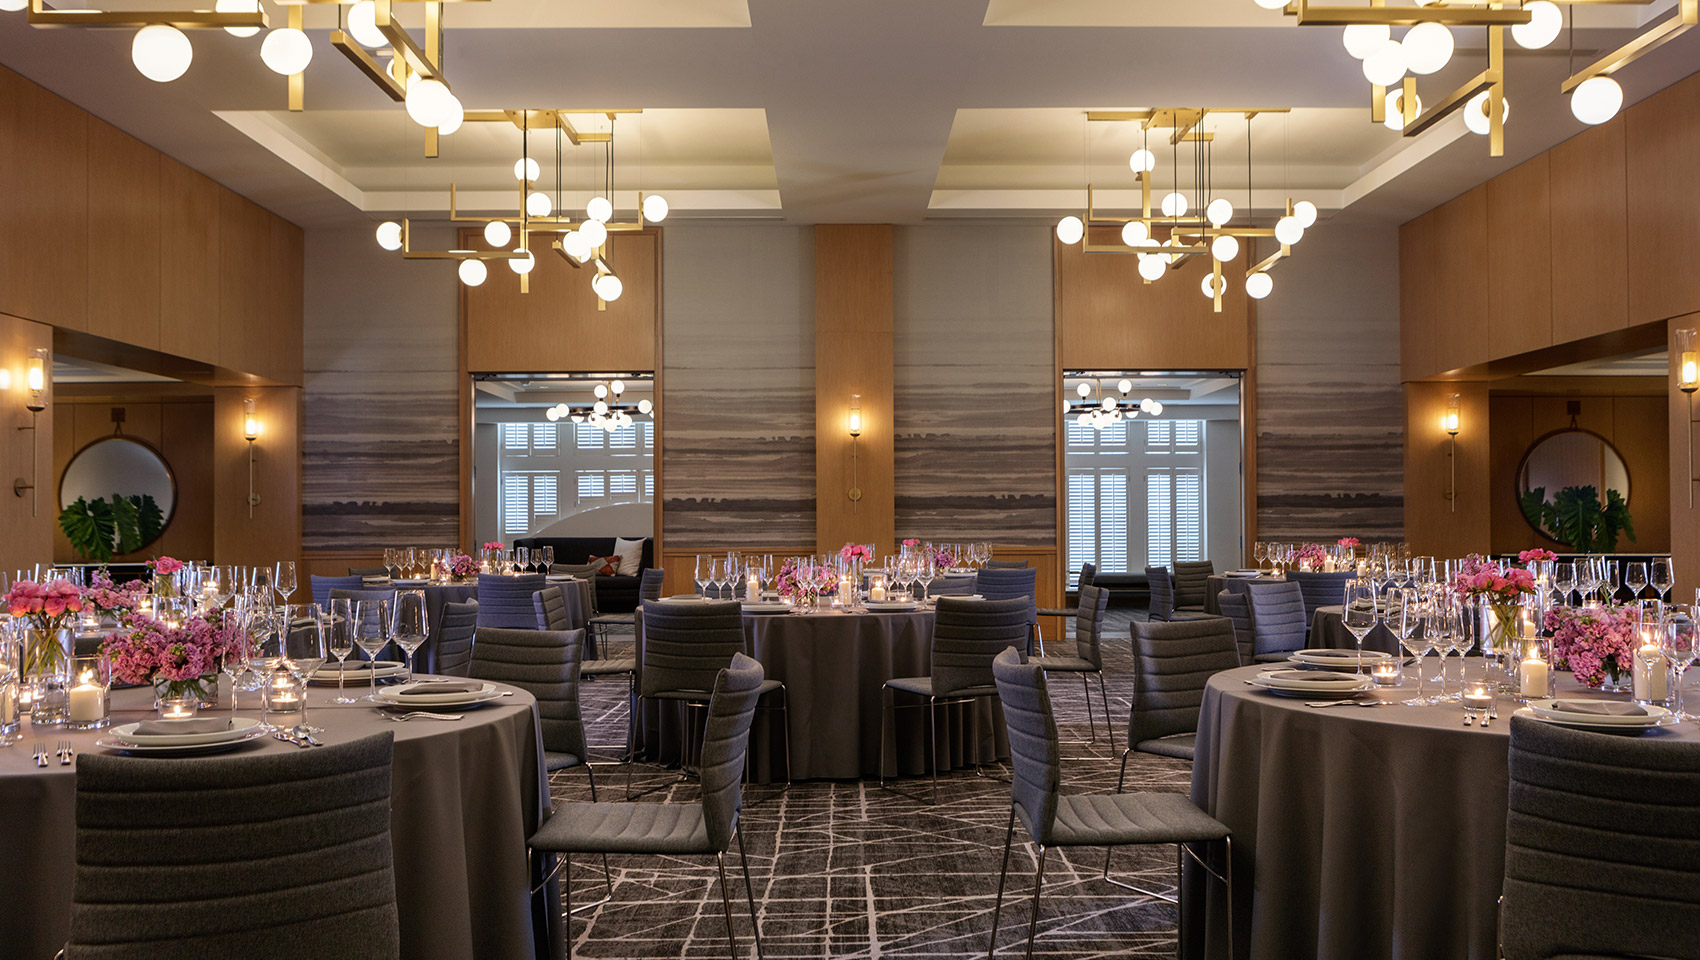 Spacious Centurion Ballroom for meetings and events